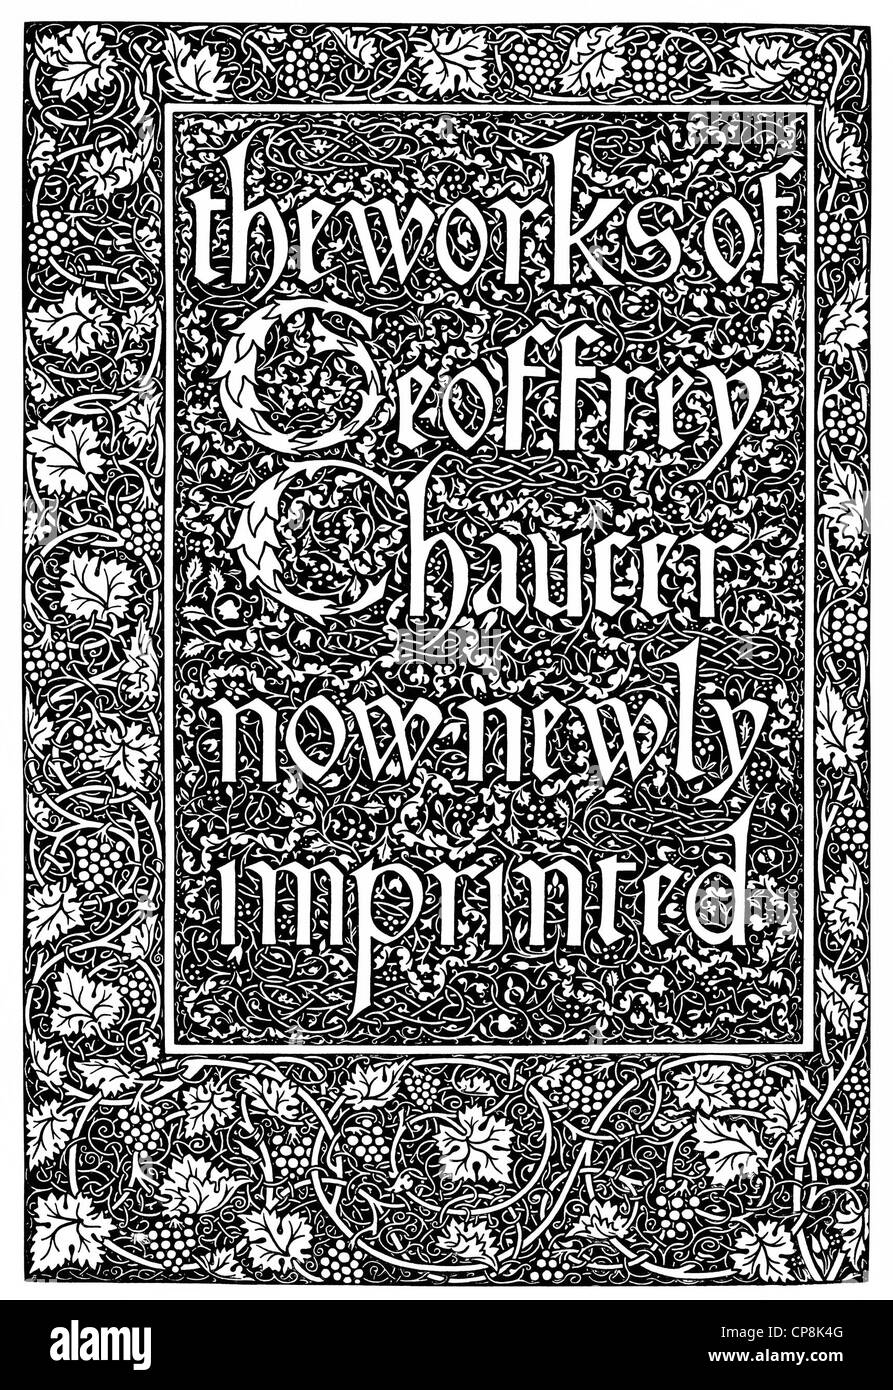 Masterpiece of the Arts, 1896, front page of The Works of Geoffrey Chaucer by William Morris, 1834 - 1896, a British textile des Stock Photo